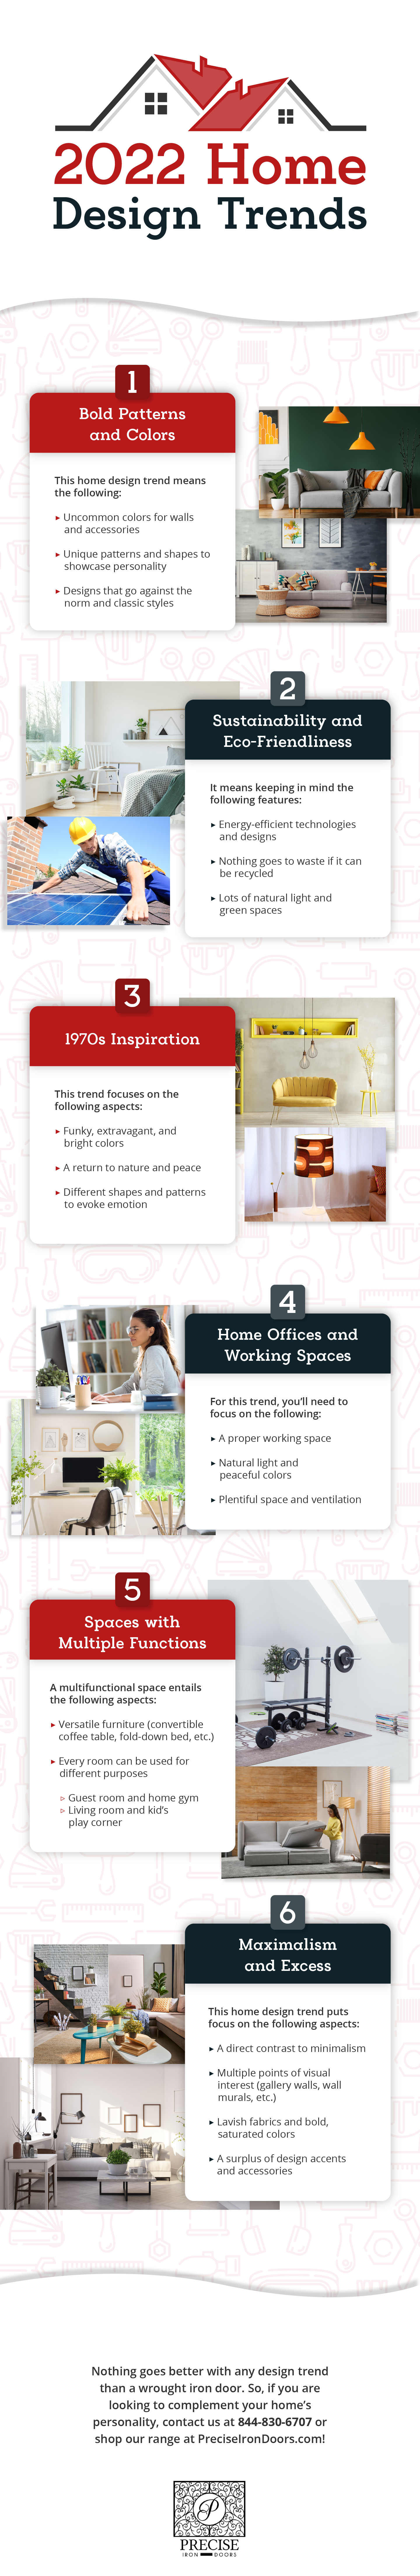 2022 Home Design Trends Infographic